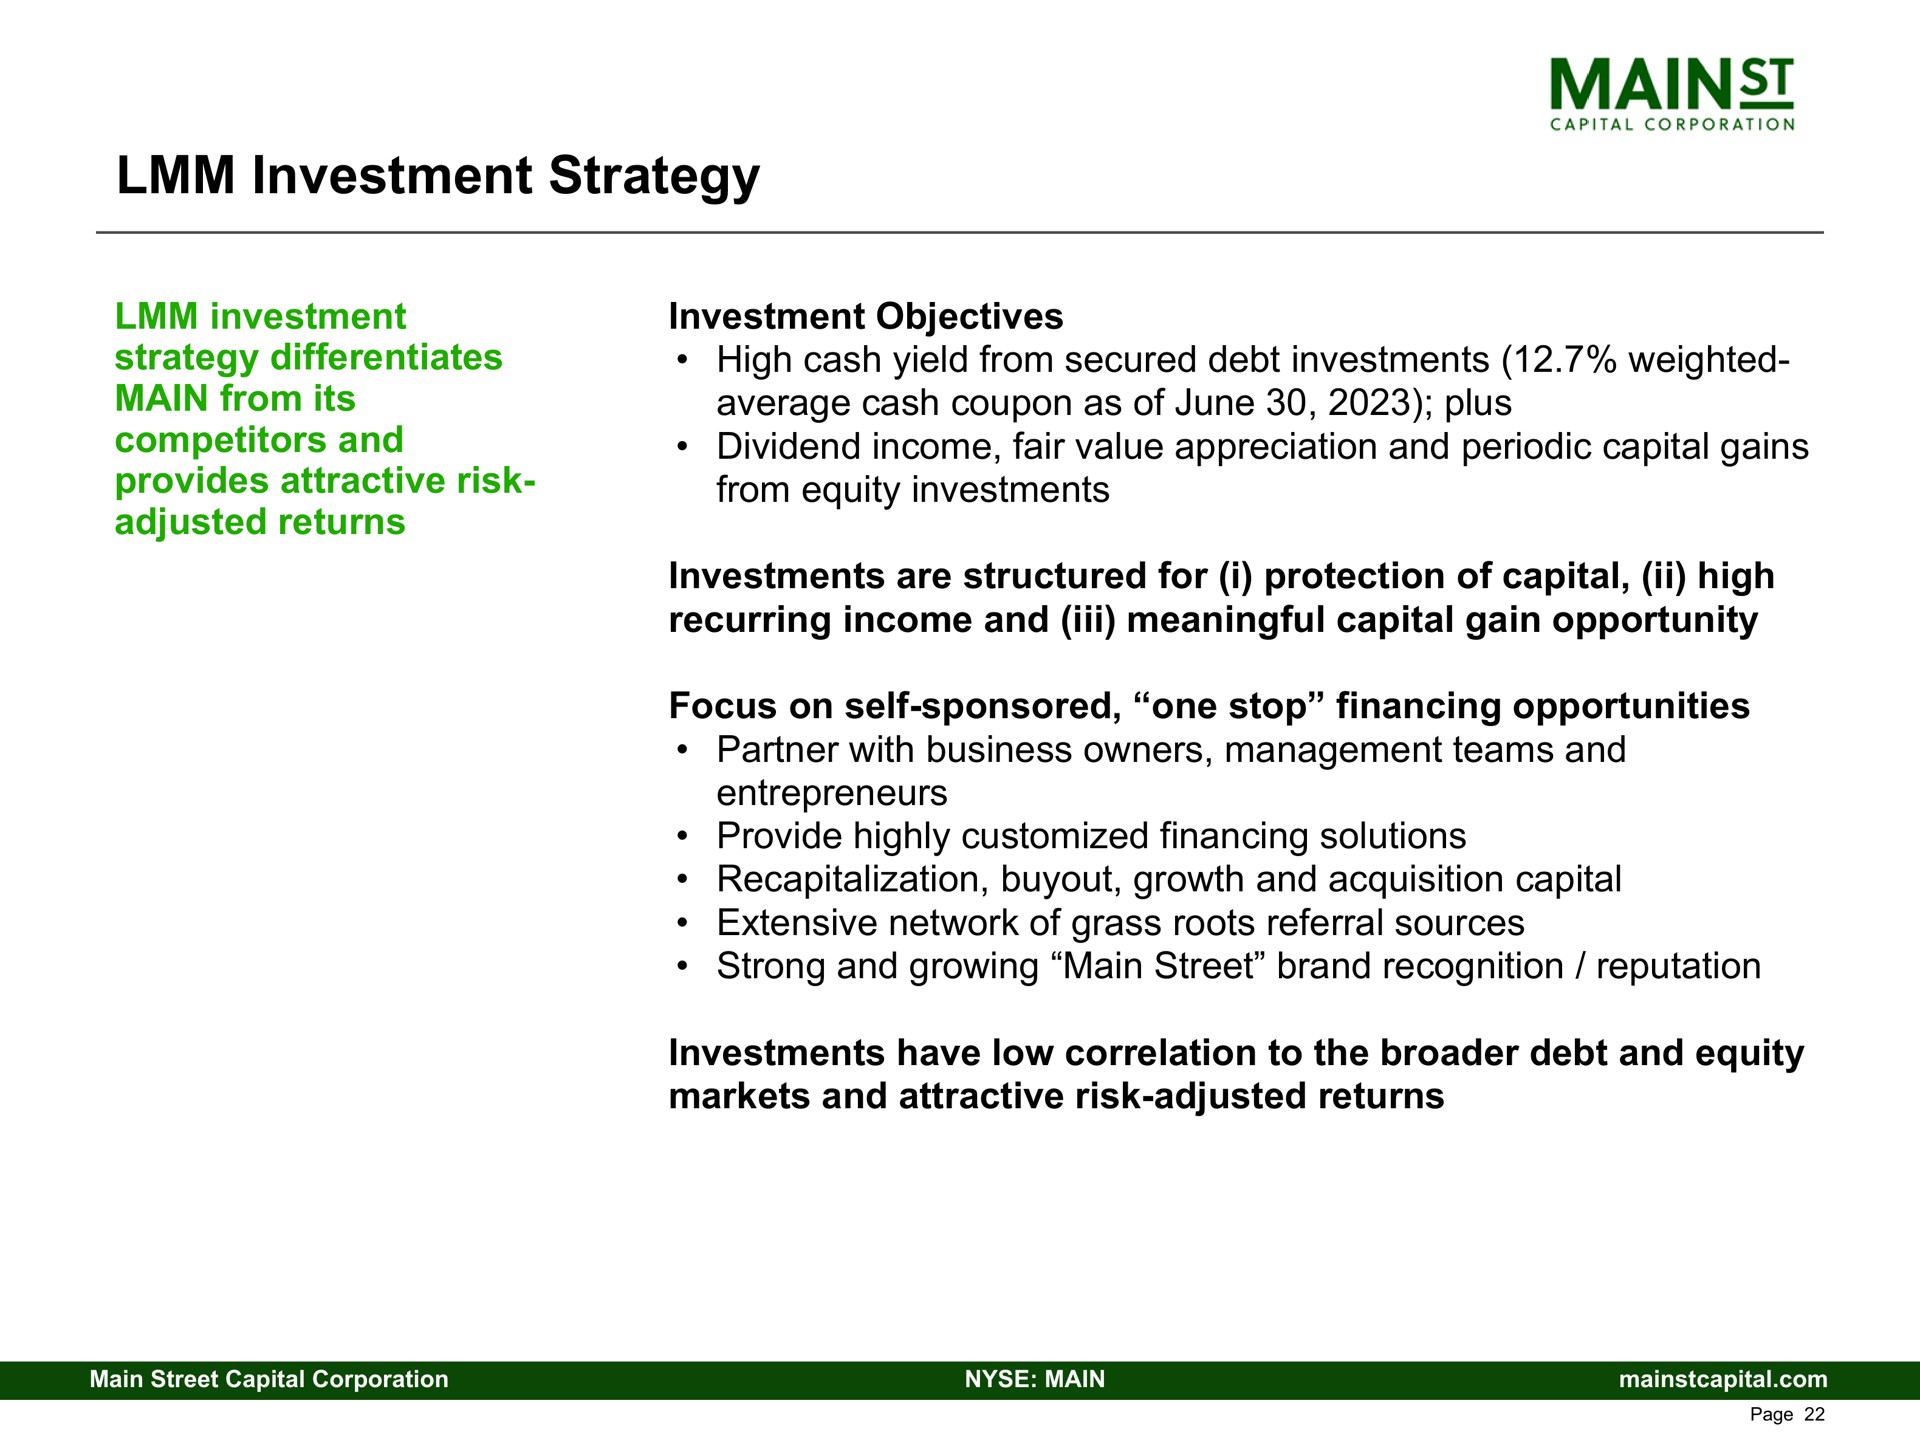 investment strategy investment strategy differentiates main from its competitors and provides attractive risk adjusted returns investment objectives high cash yield from secured debt investments weighted average cash coupon as of june plus dividend income fair value appreciation and periodic capital gains from equity investments investments are structured for i protection of capital high recurring income and meaningful capital gain opportunity focus on self sponsored one stop financing opportunities partner with business owners management teams and entrepreneurs provide highly financing solutions recapitalization growth and acquisition capital extensive network of grass roots referral sources strong and growing main street brand recognition reputation investments have low correlation to the debt and equity markets and attractive risk adjusted returns | Main Street Capital